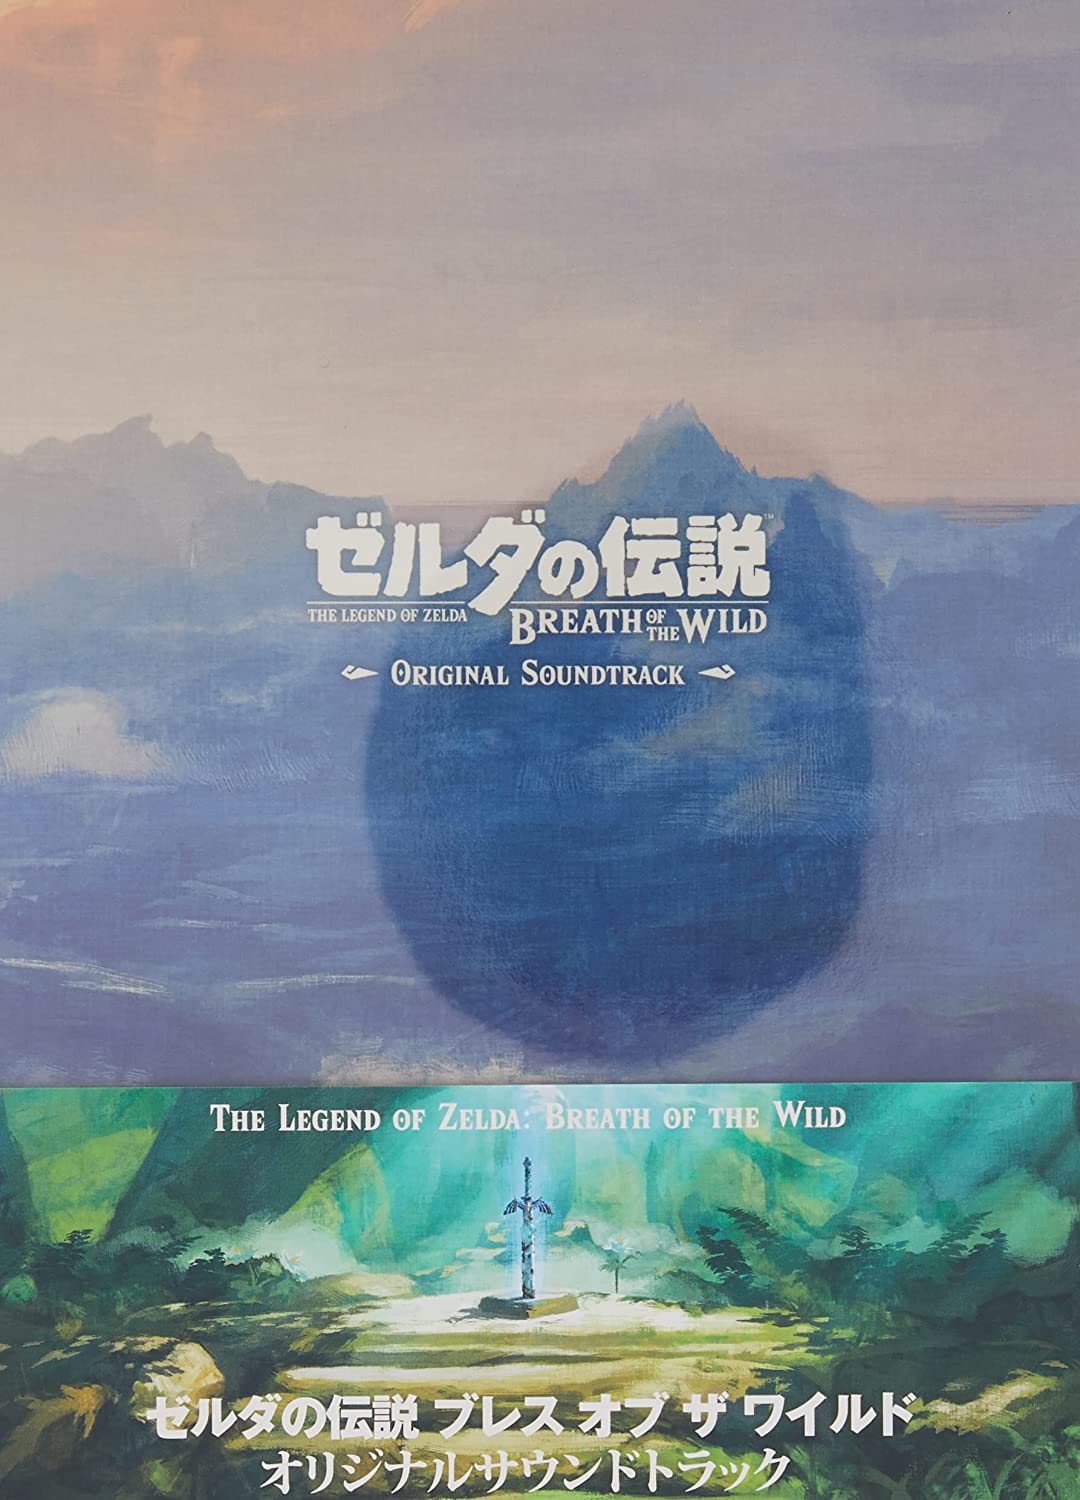 The Versions - The Legend of Zelda: Breath of the Wild, Vol. 1: lyrics and  songs